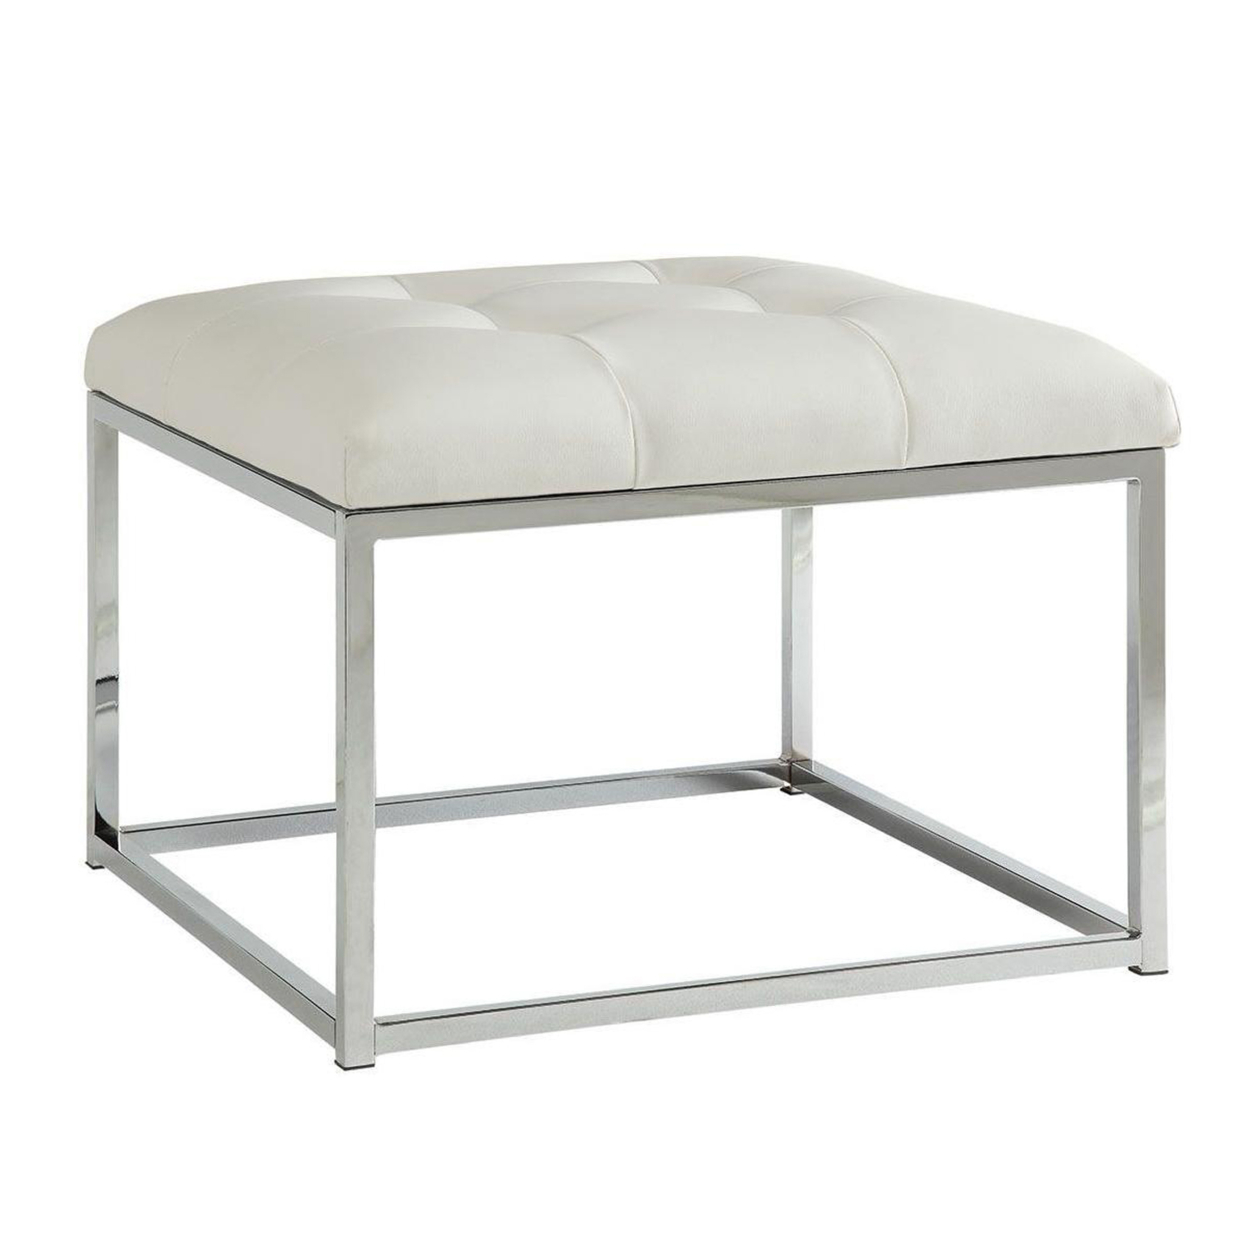 Leatherette Metal Frame Ottoman With Tufted Seating, White And Silver- Saltoro Sherpi